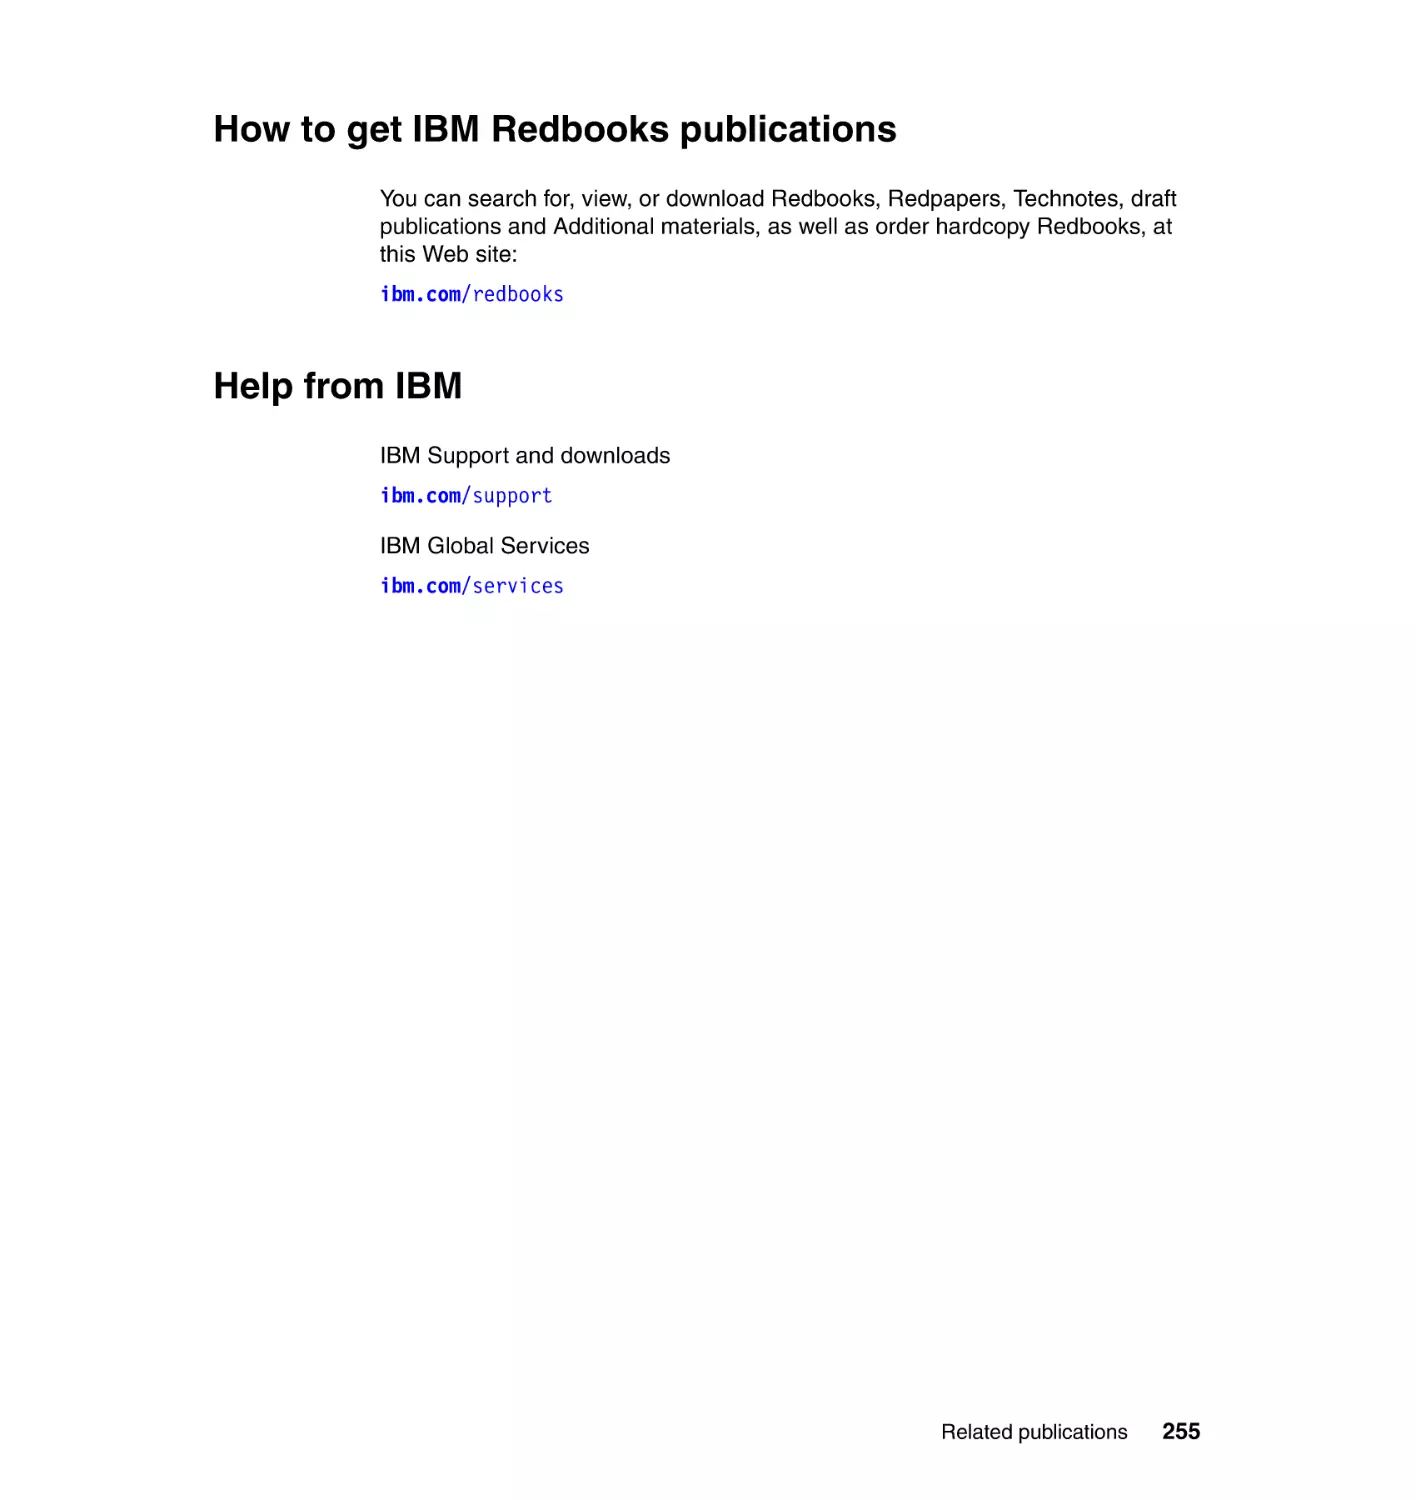 How to get IBM Redbooks publications
Help from IBM